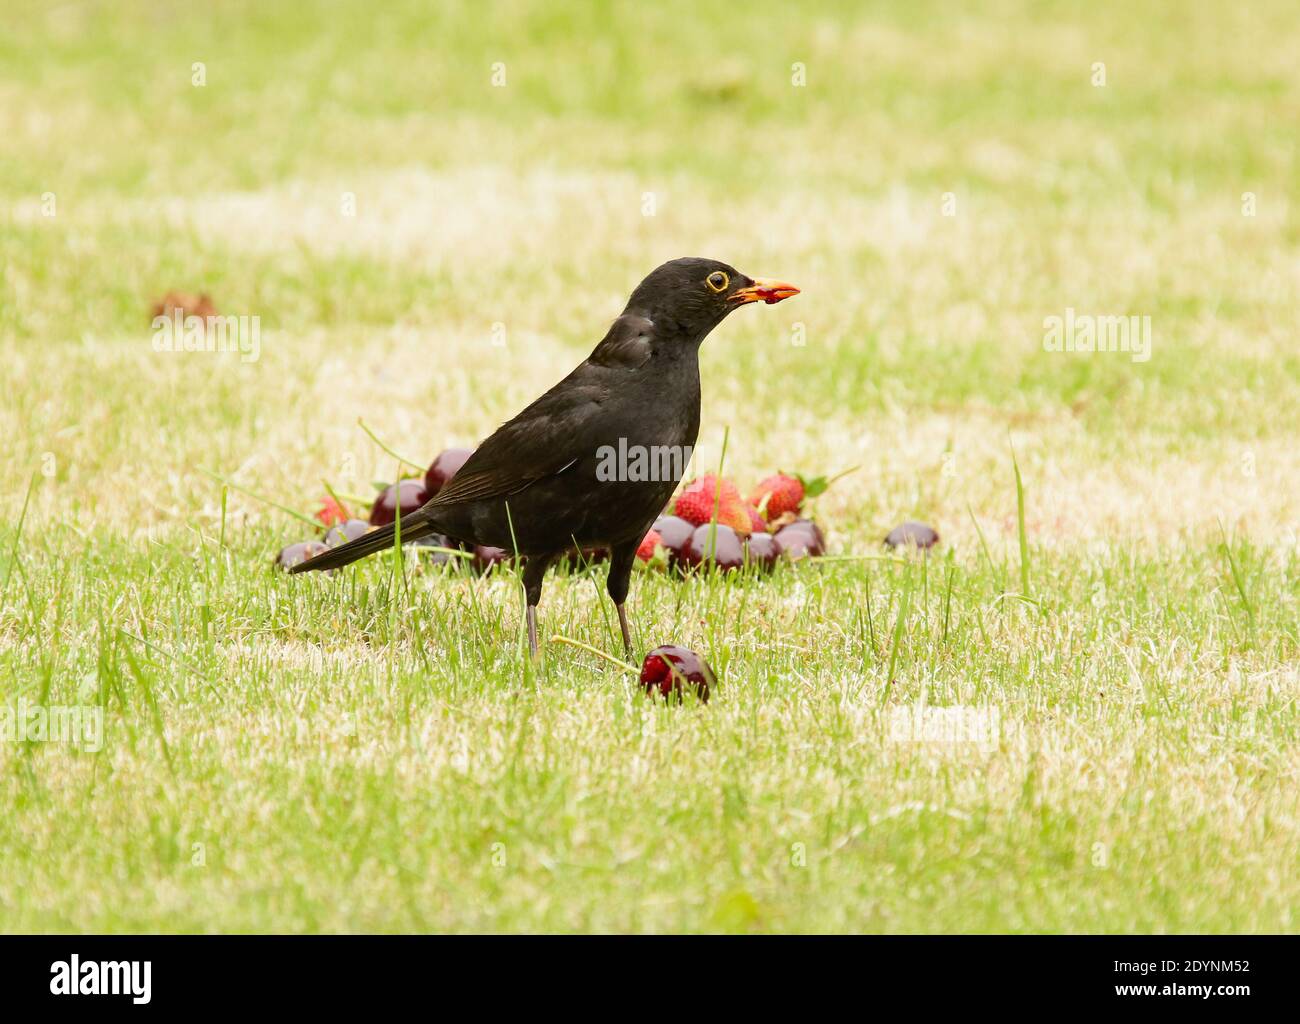 A common blackbird taking cherries and strawberries left on a lawn. Stock Photo